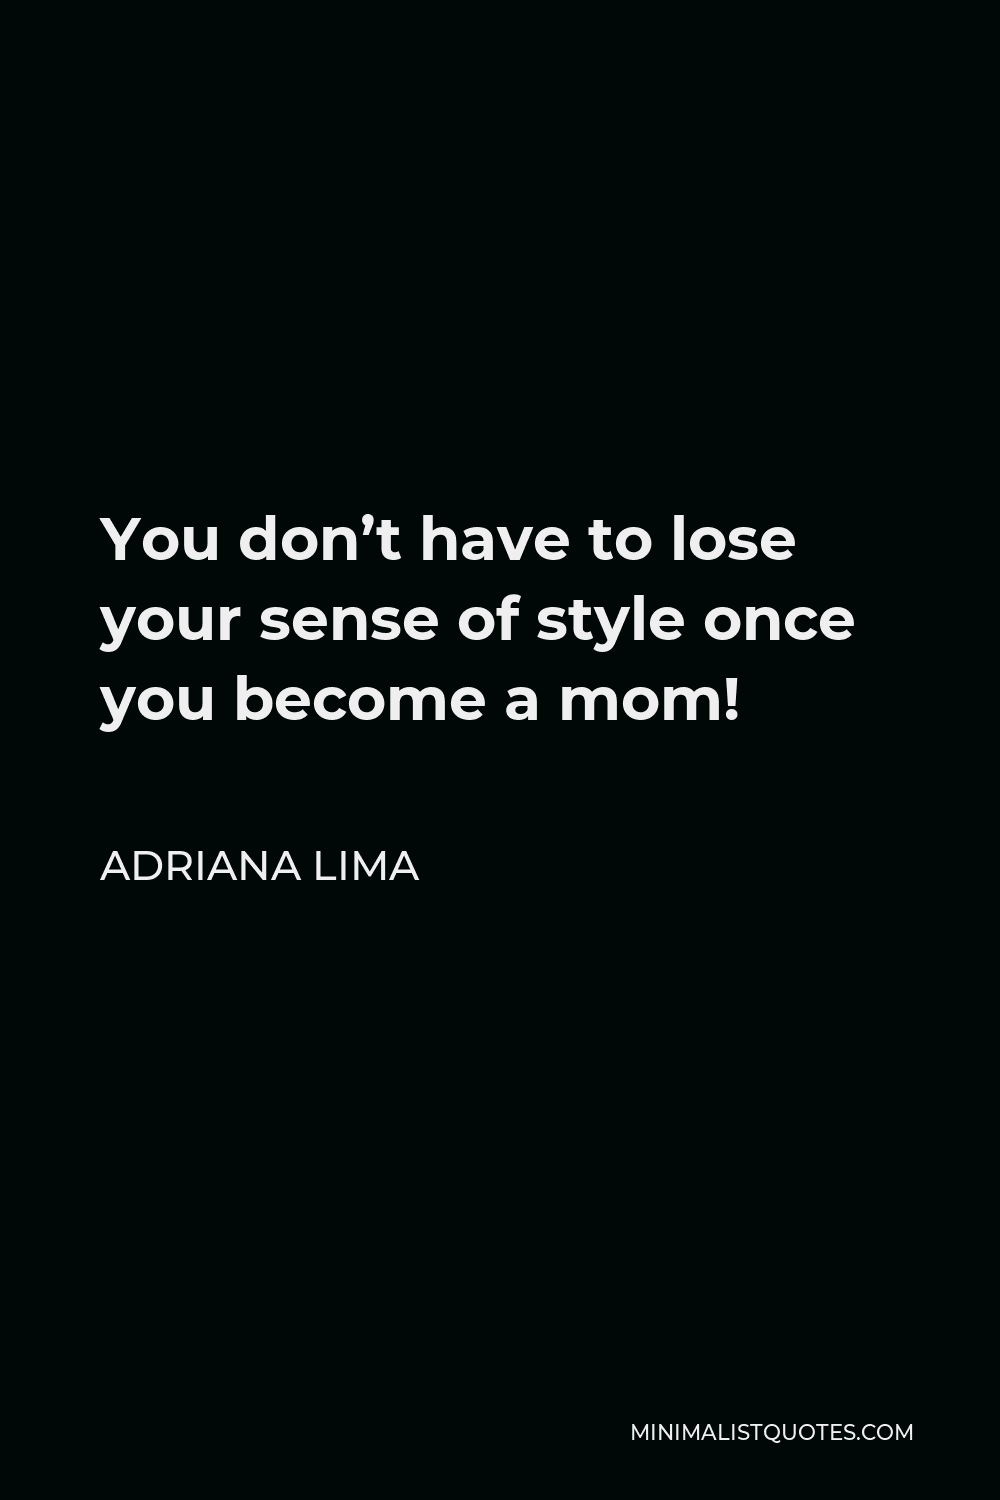 Adriana Lima Quote - You don’t have to lose your sense of style once you become a mom!